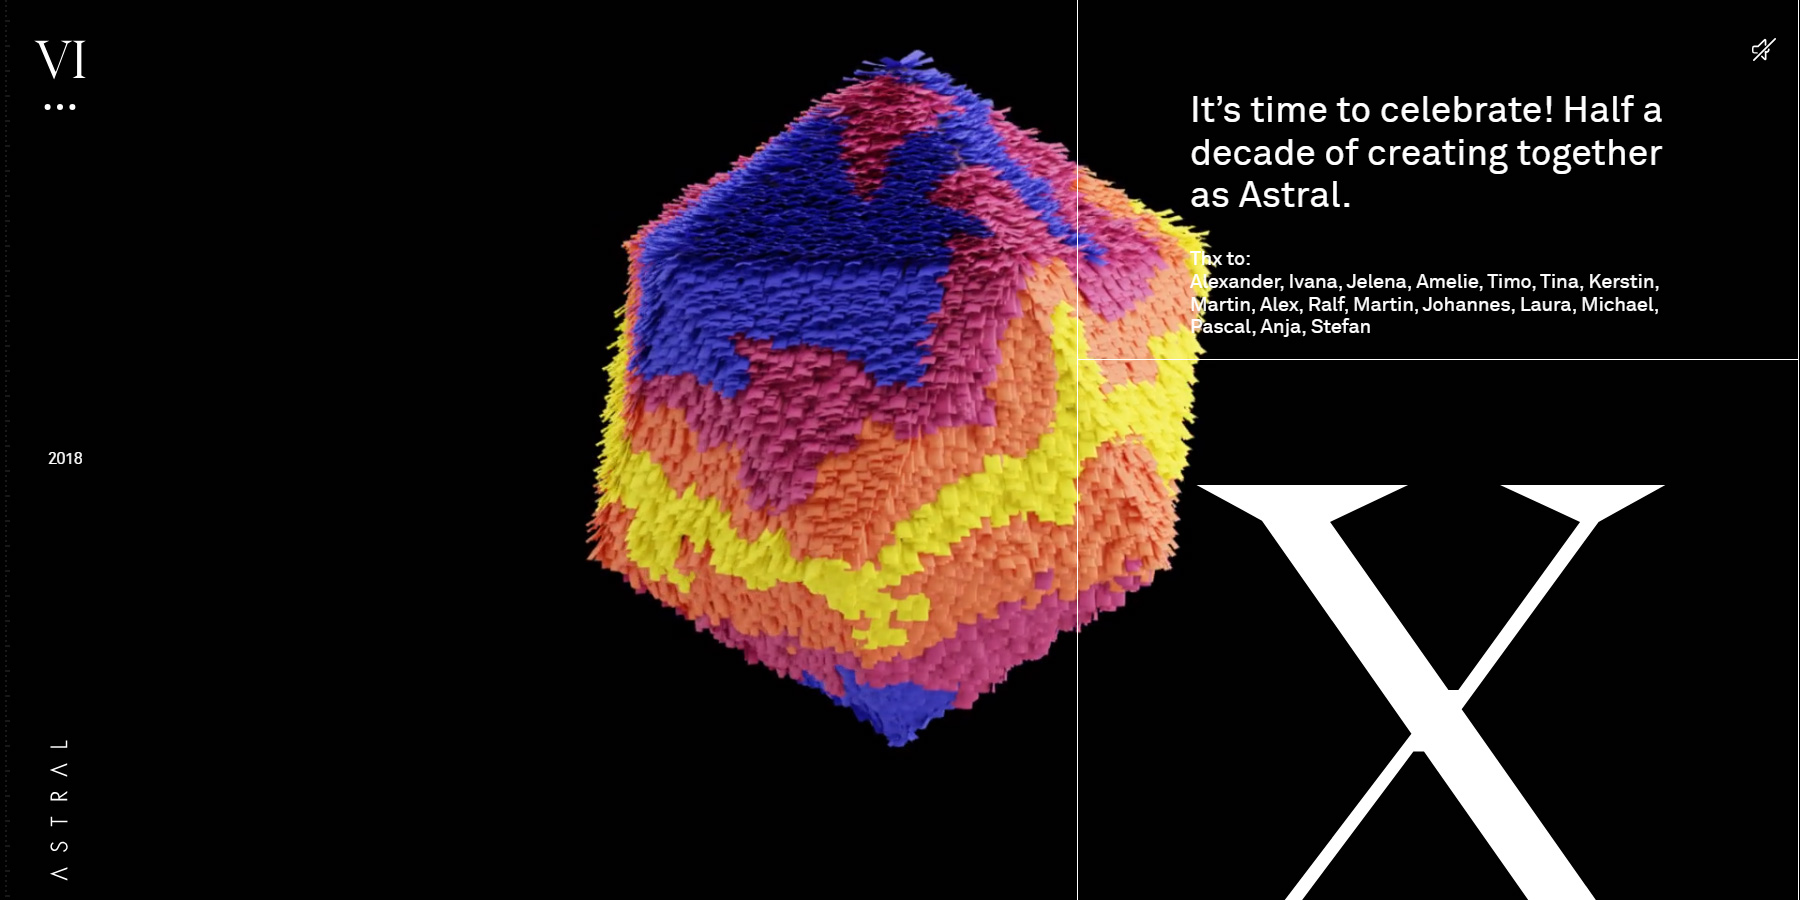 10 years of Astral - Website of the Day